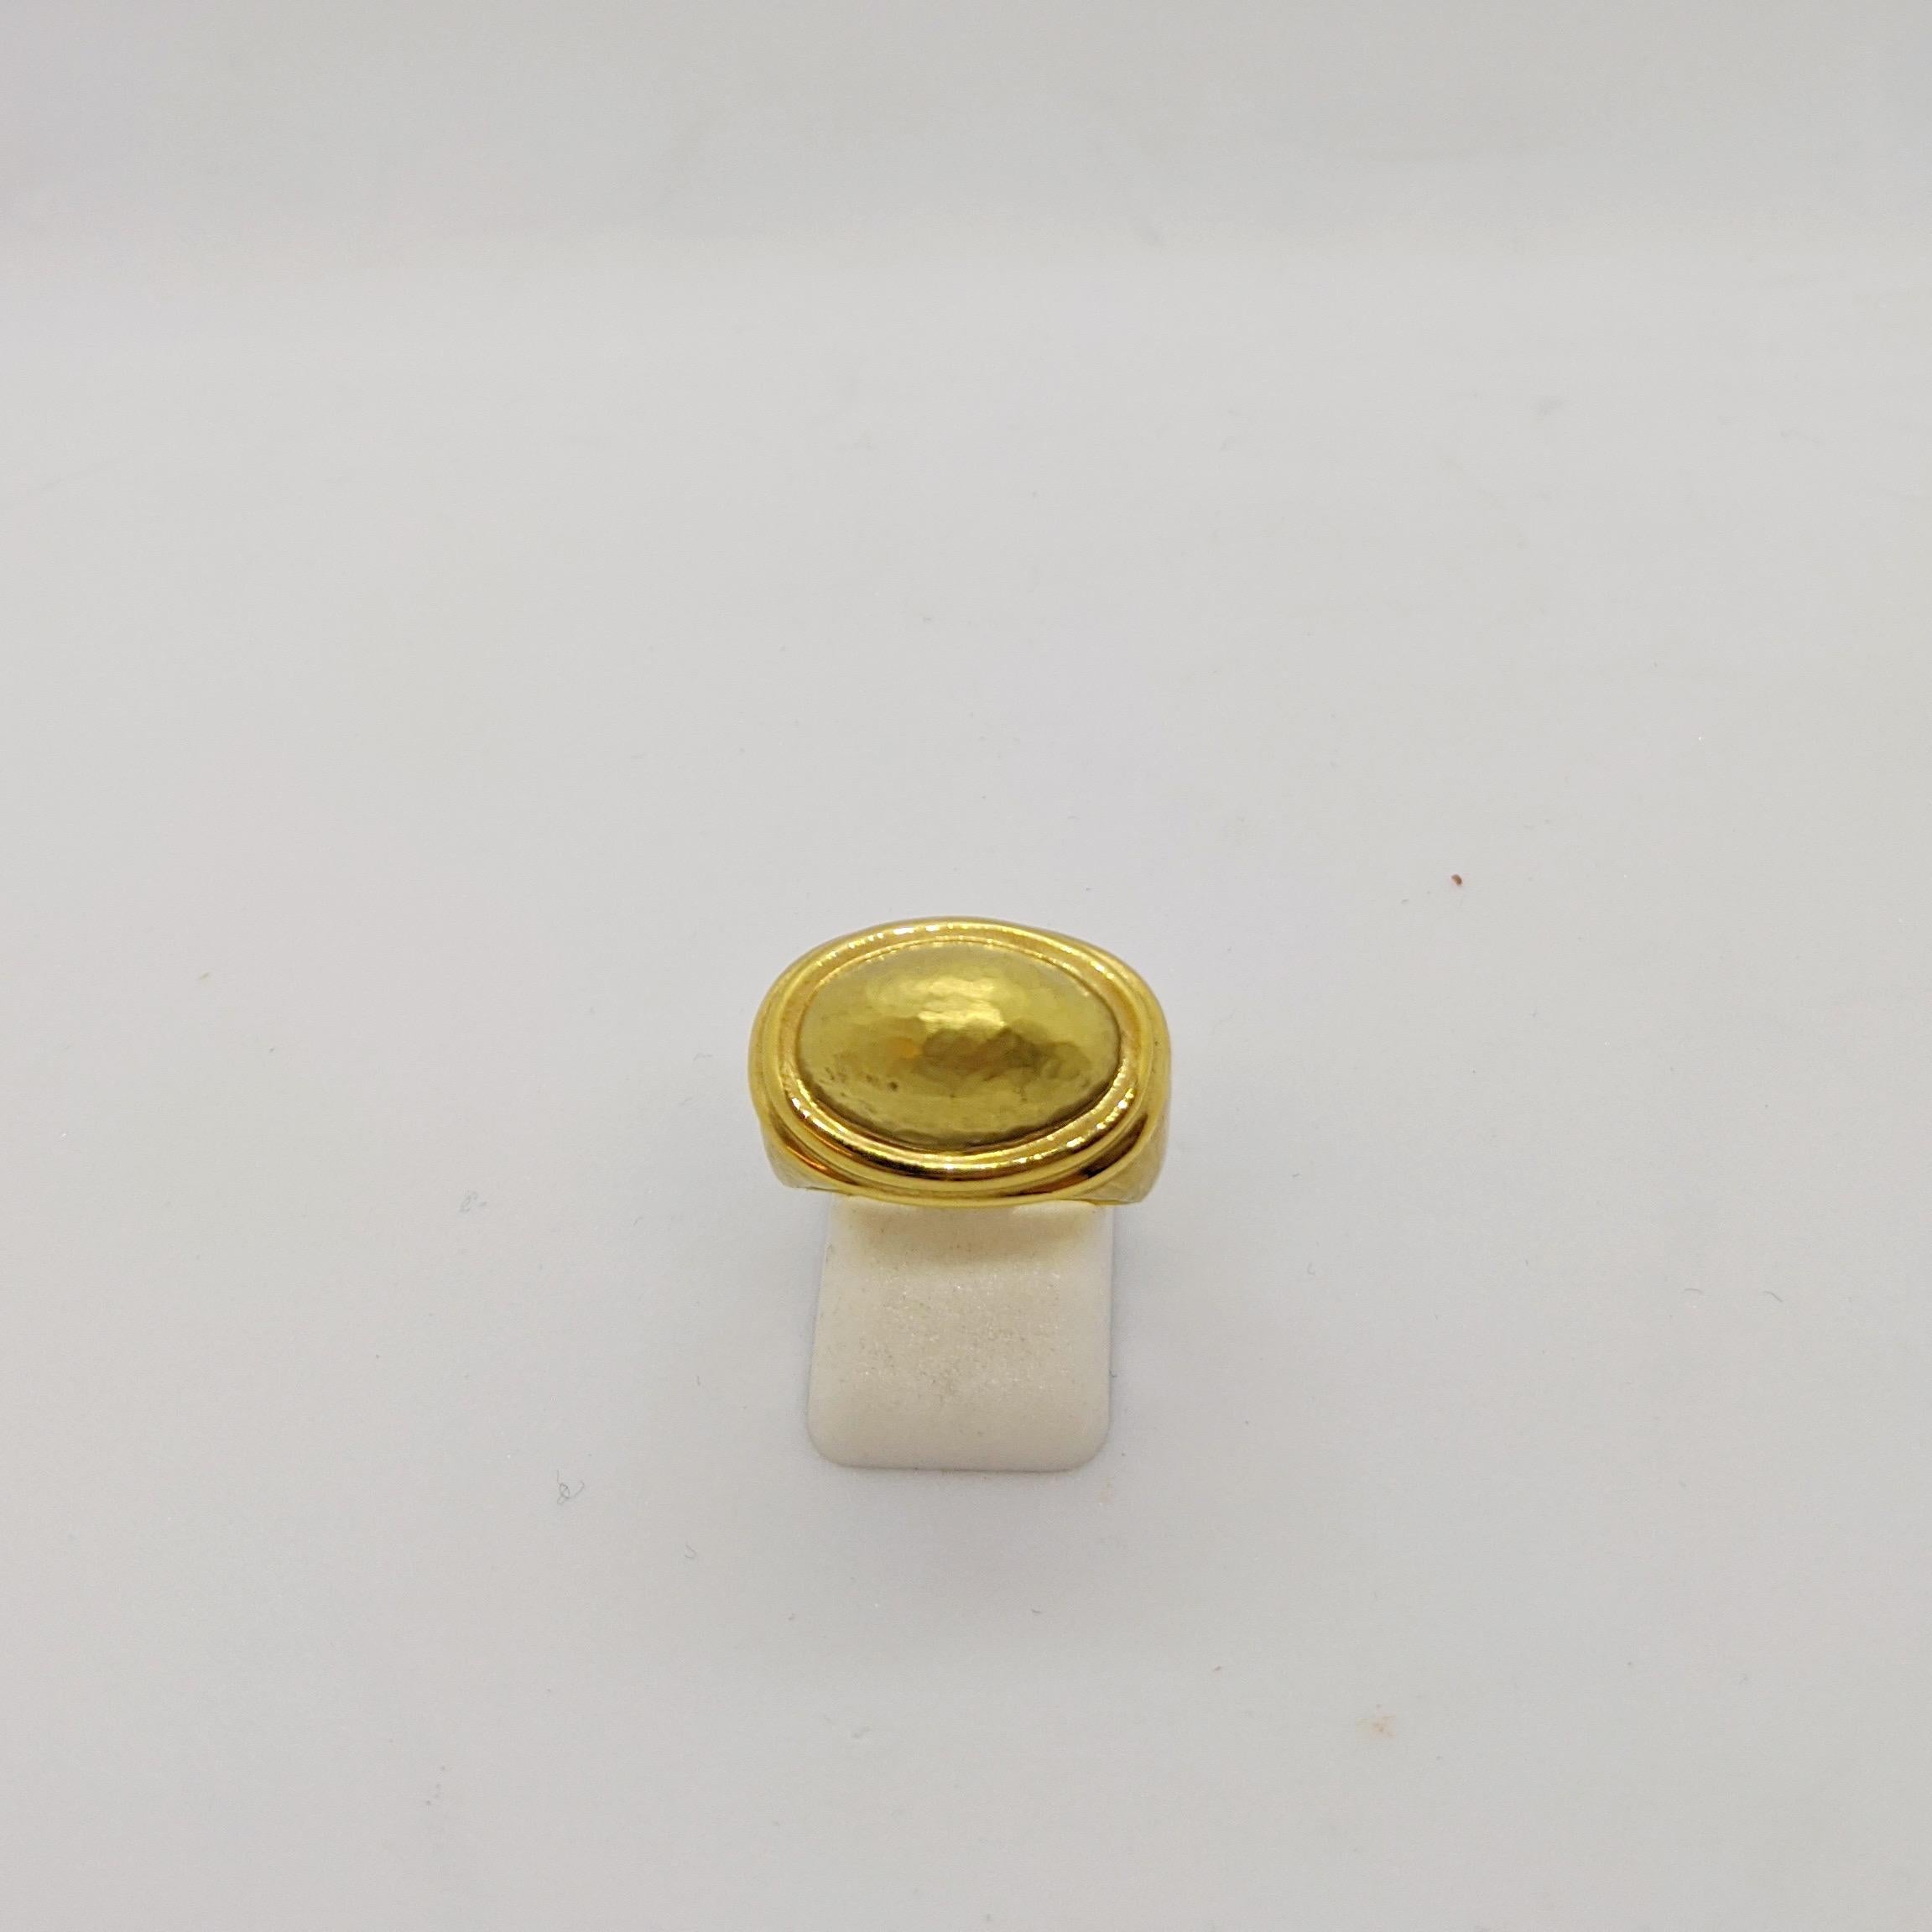 18 karat yellow gold ring designed with a beautiful hammered matte finish. The oval dome measures approximately 20 mm across and 14 mm length.
Ring size 7
Sizing options are available
Stamped 18K 750 Italy